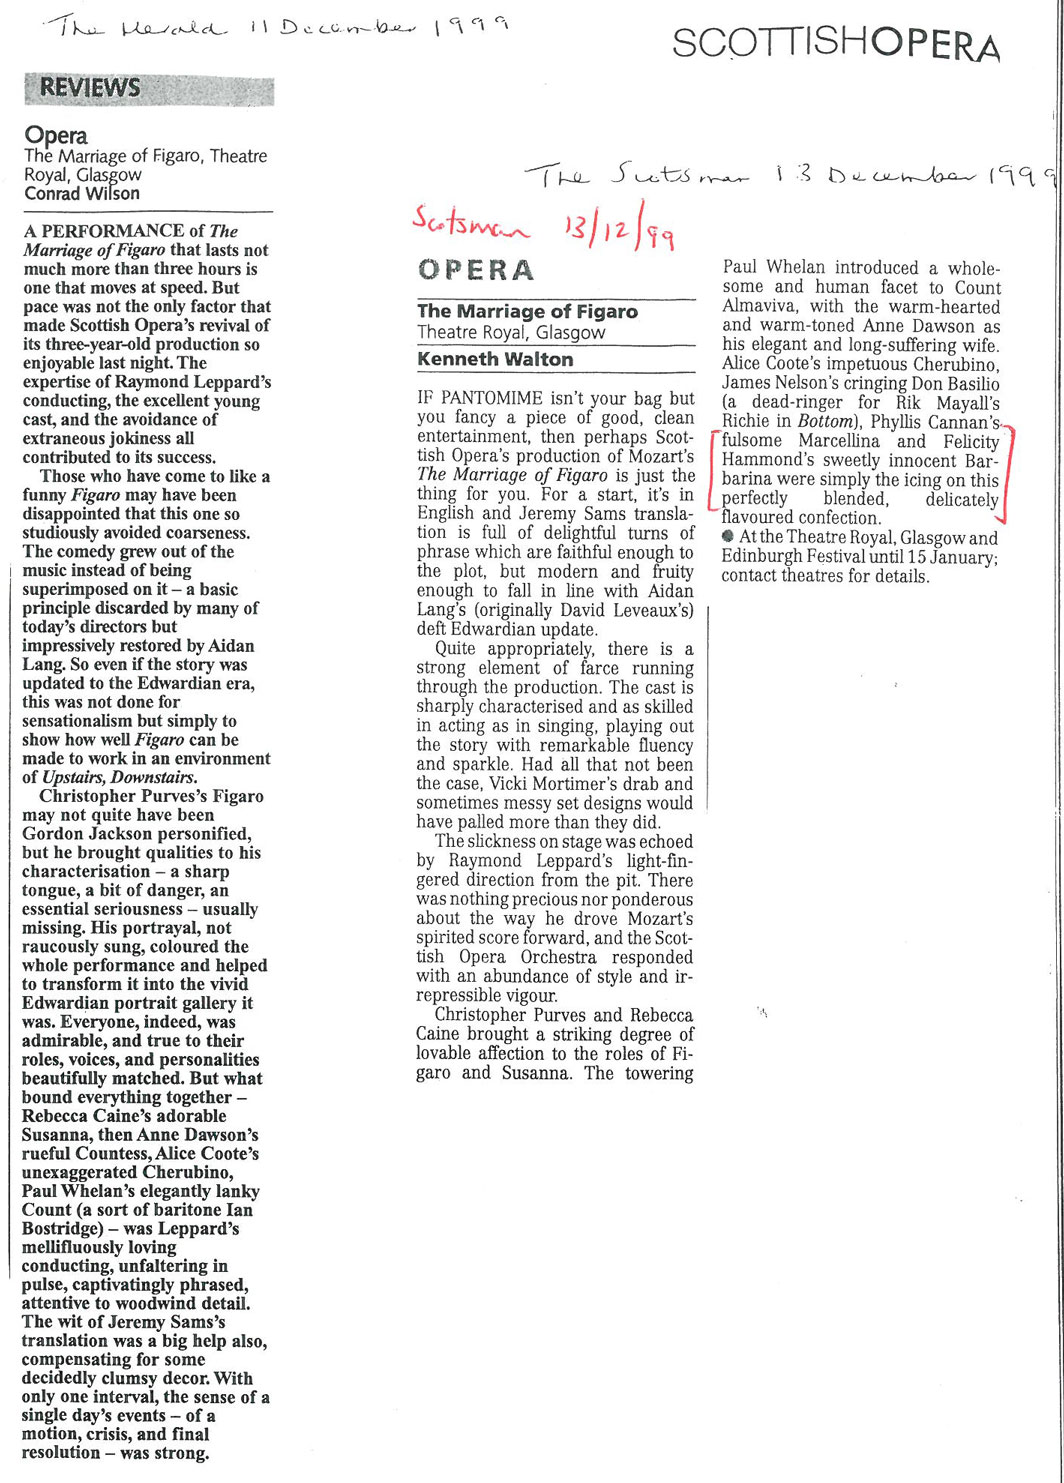 Reviews, 1999, The Marriage of Figaro